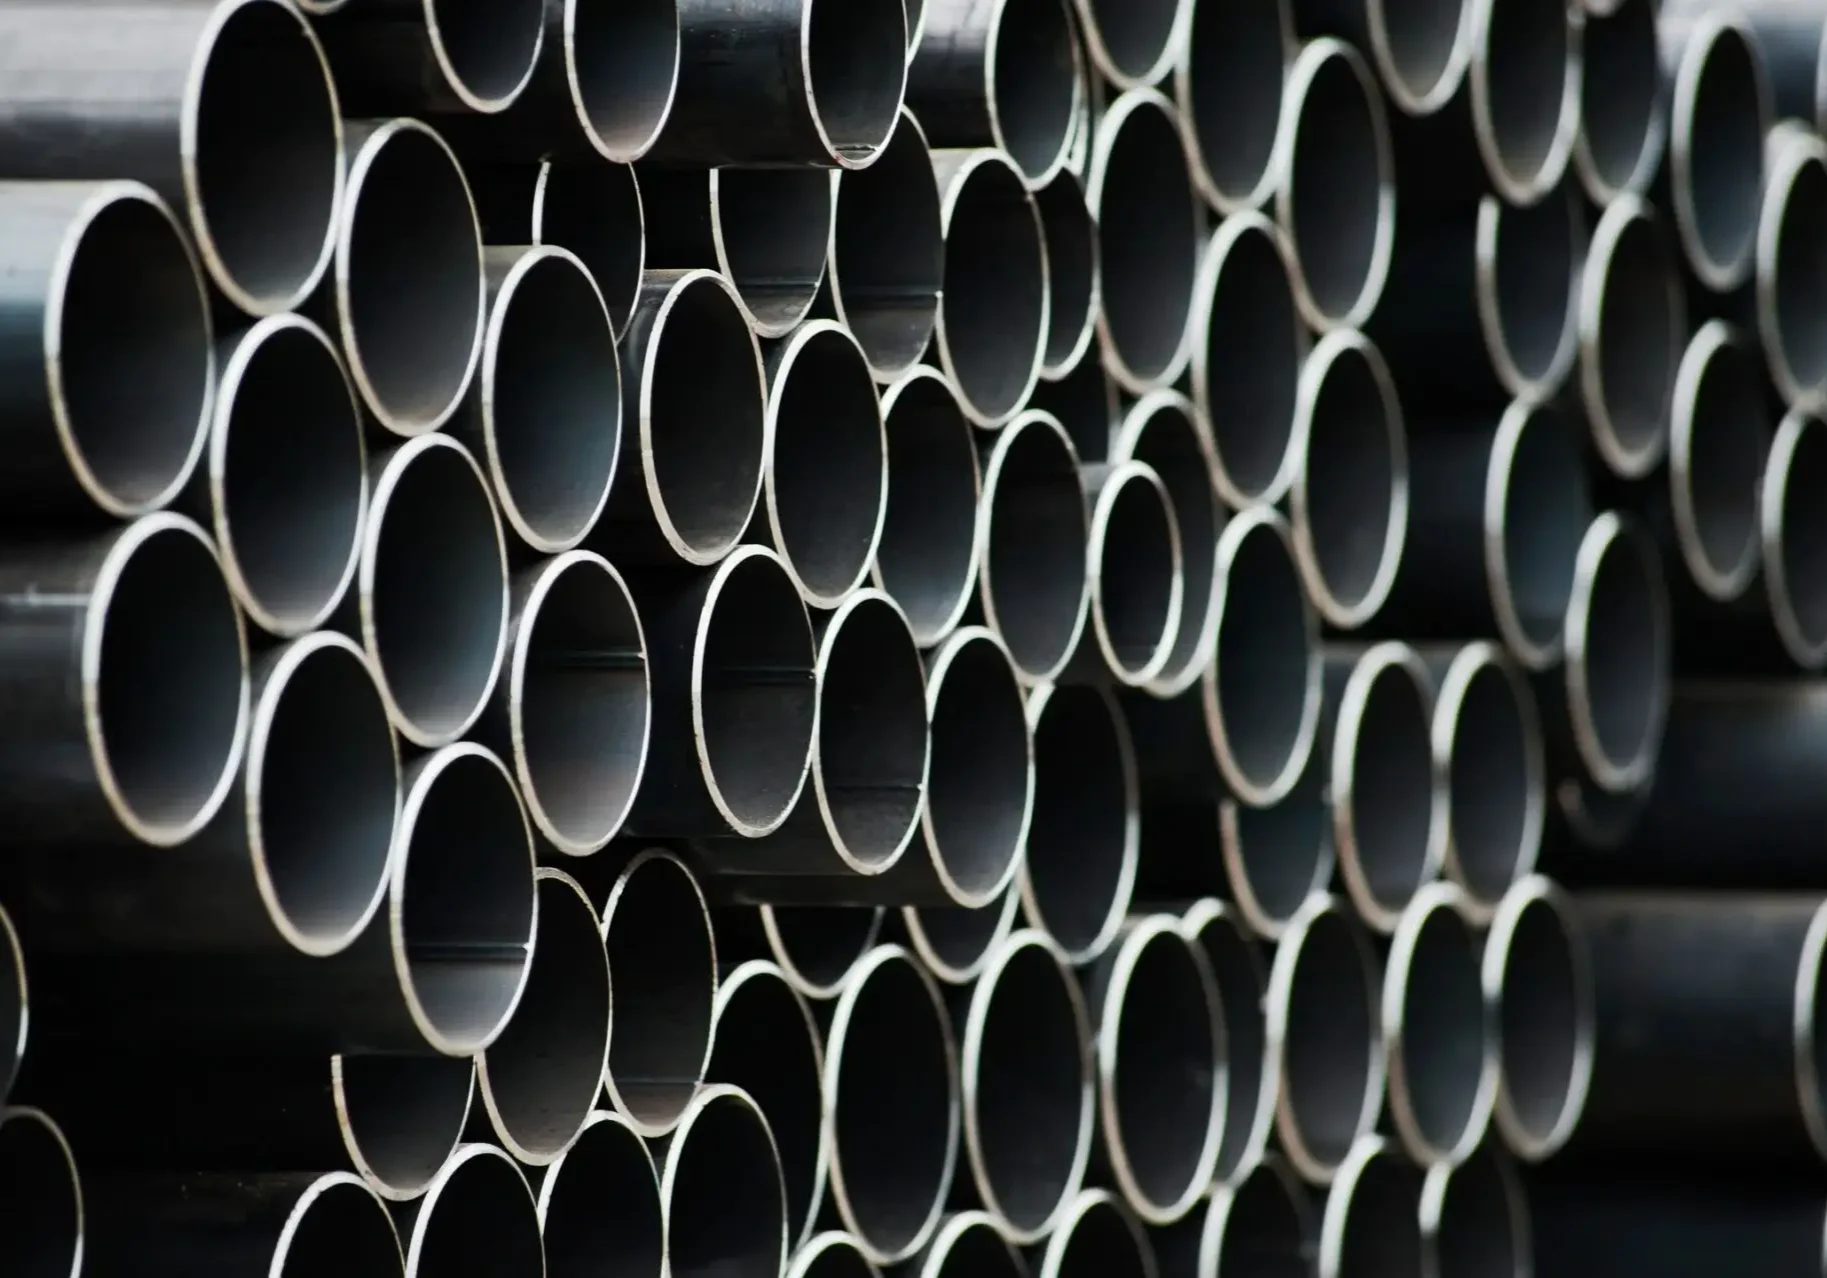 Ends of large metal tubes stacked on one another